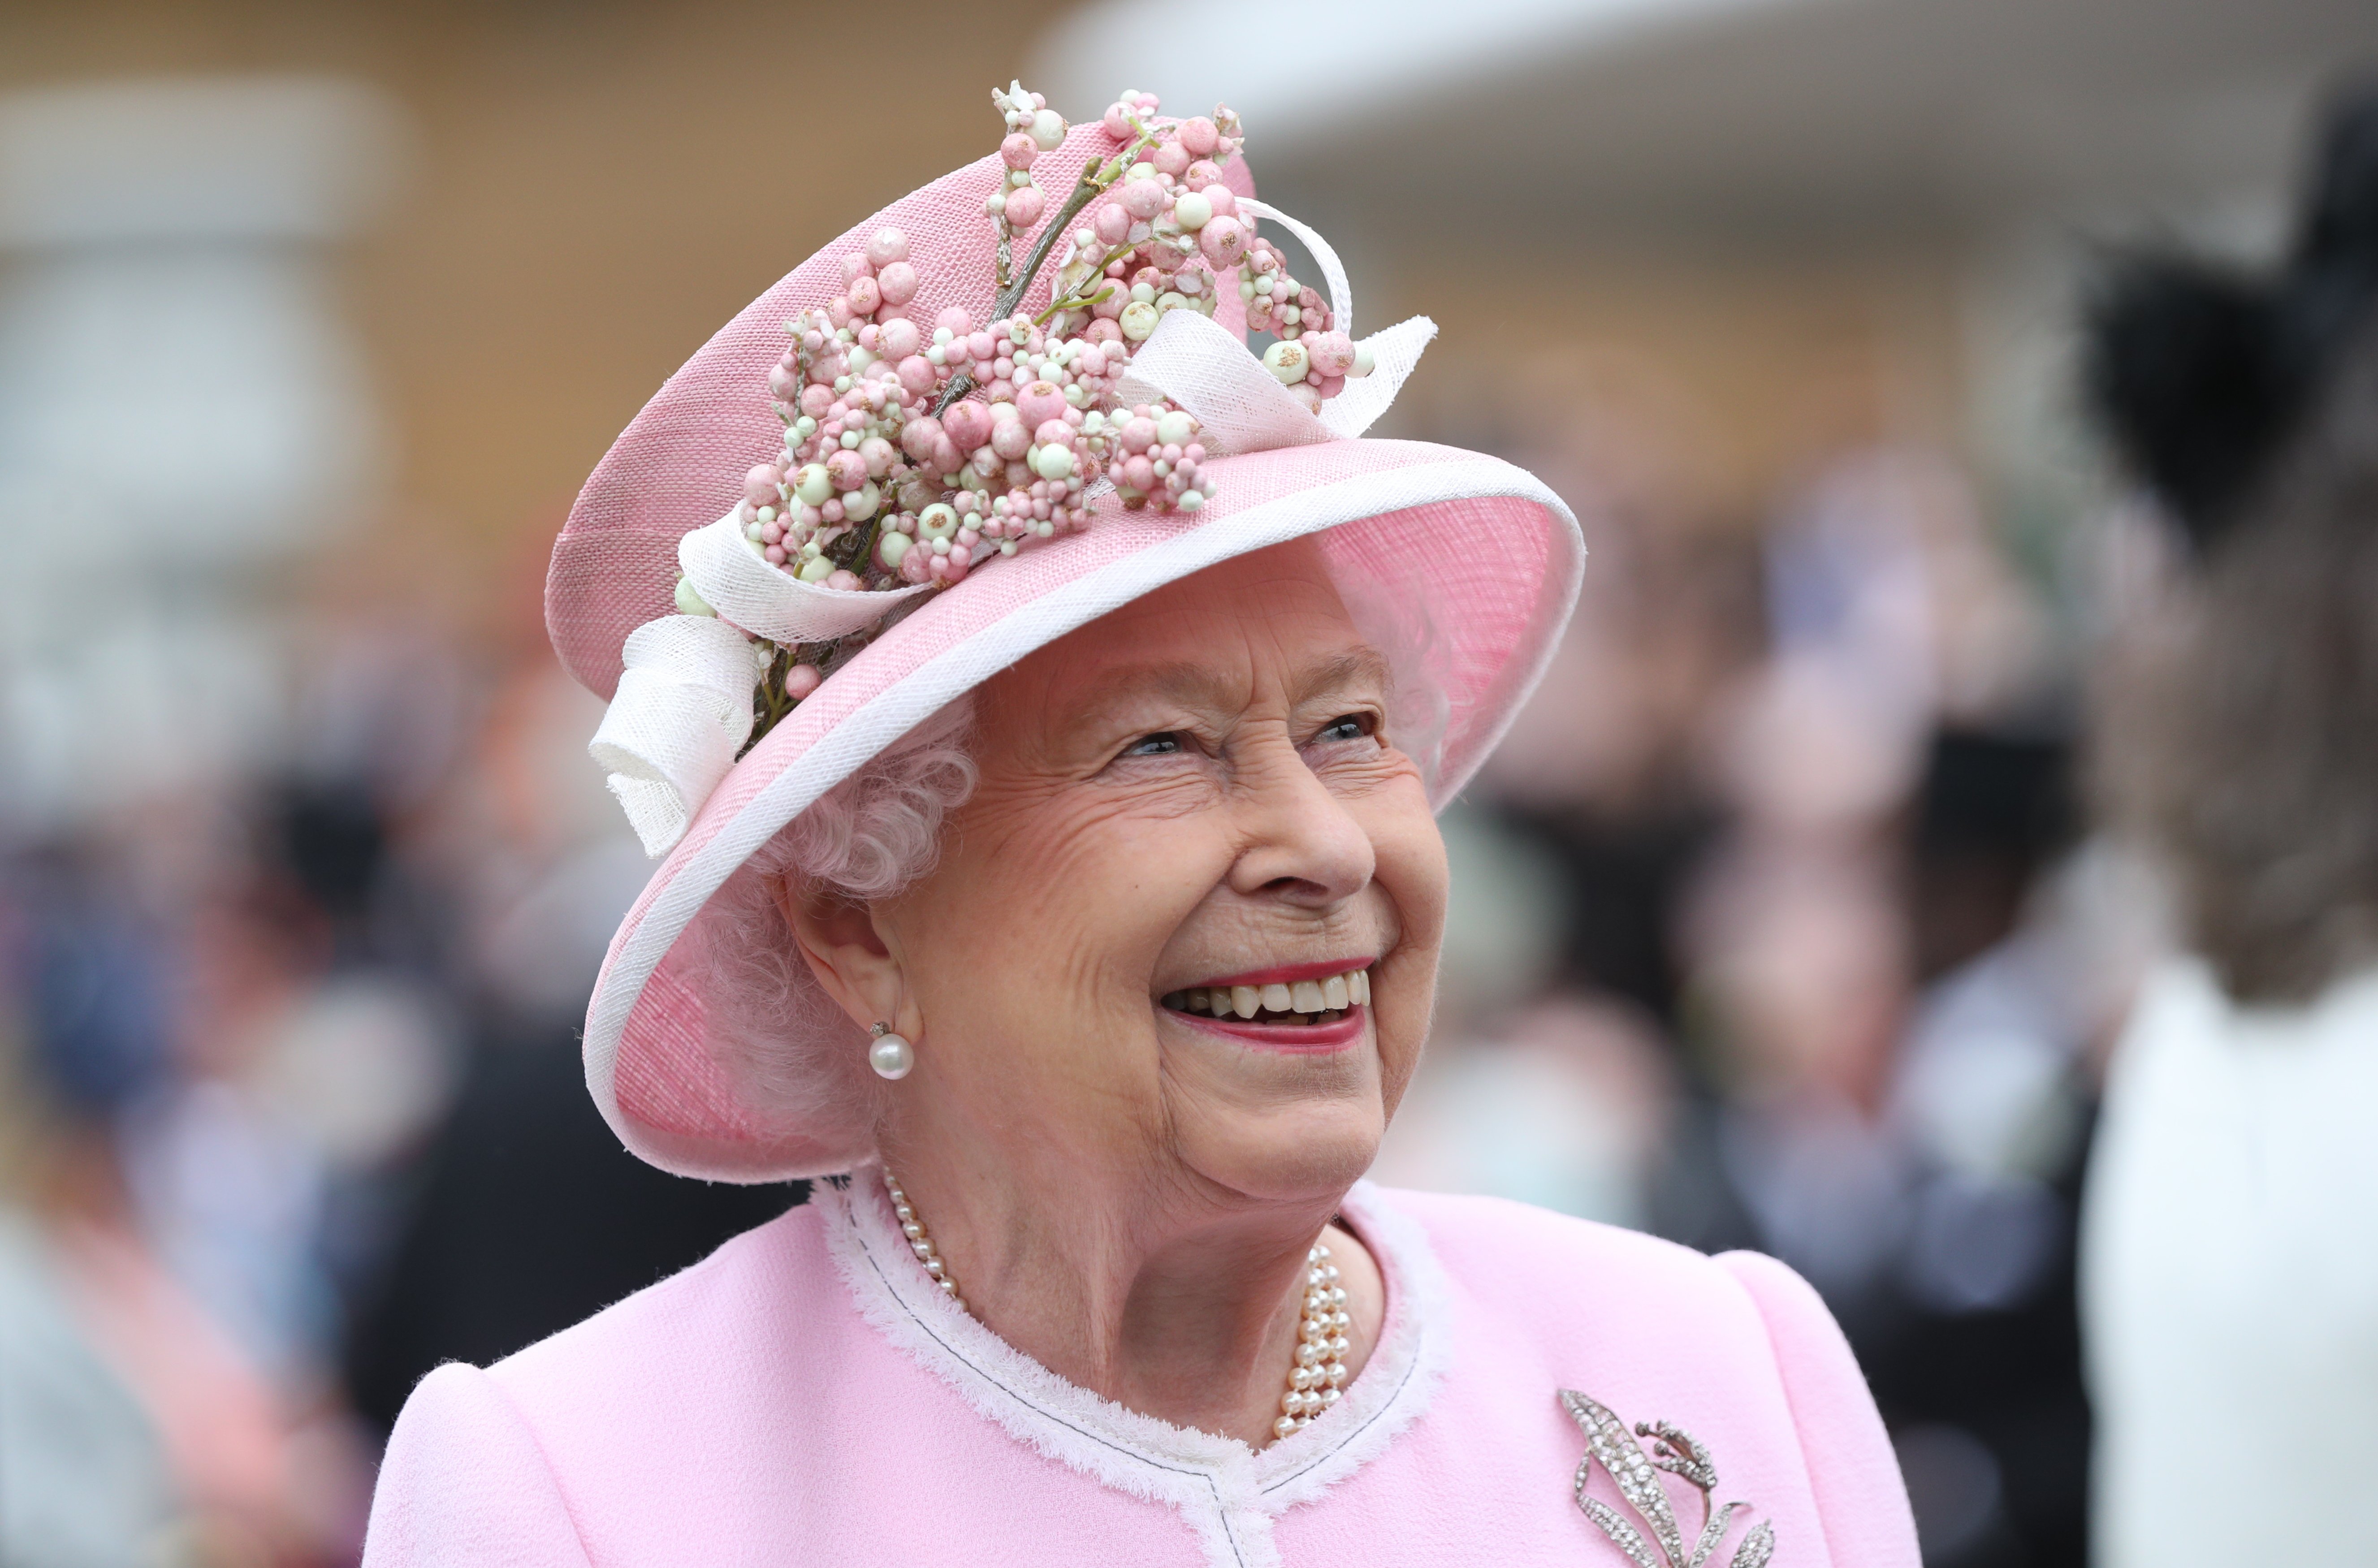 Queen Elizabeth II attending the Royal Garden Party at Buckingham Palace on May 29, 2019 in London, England.│Source: Getty Images